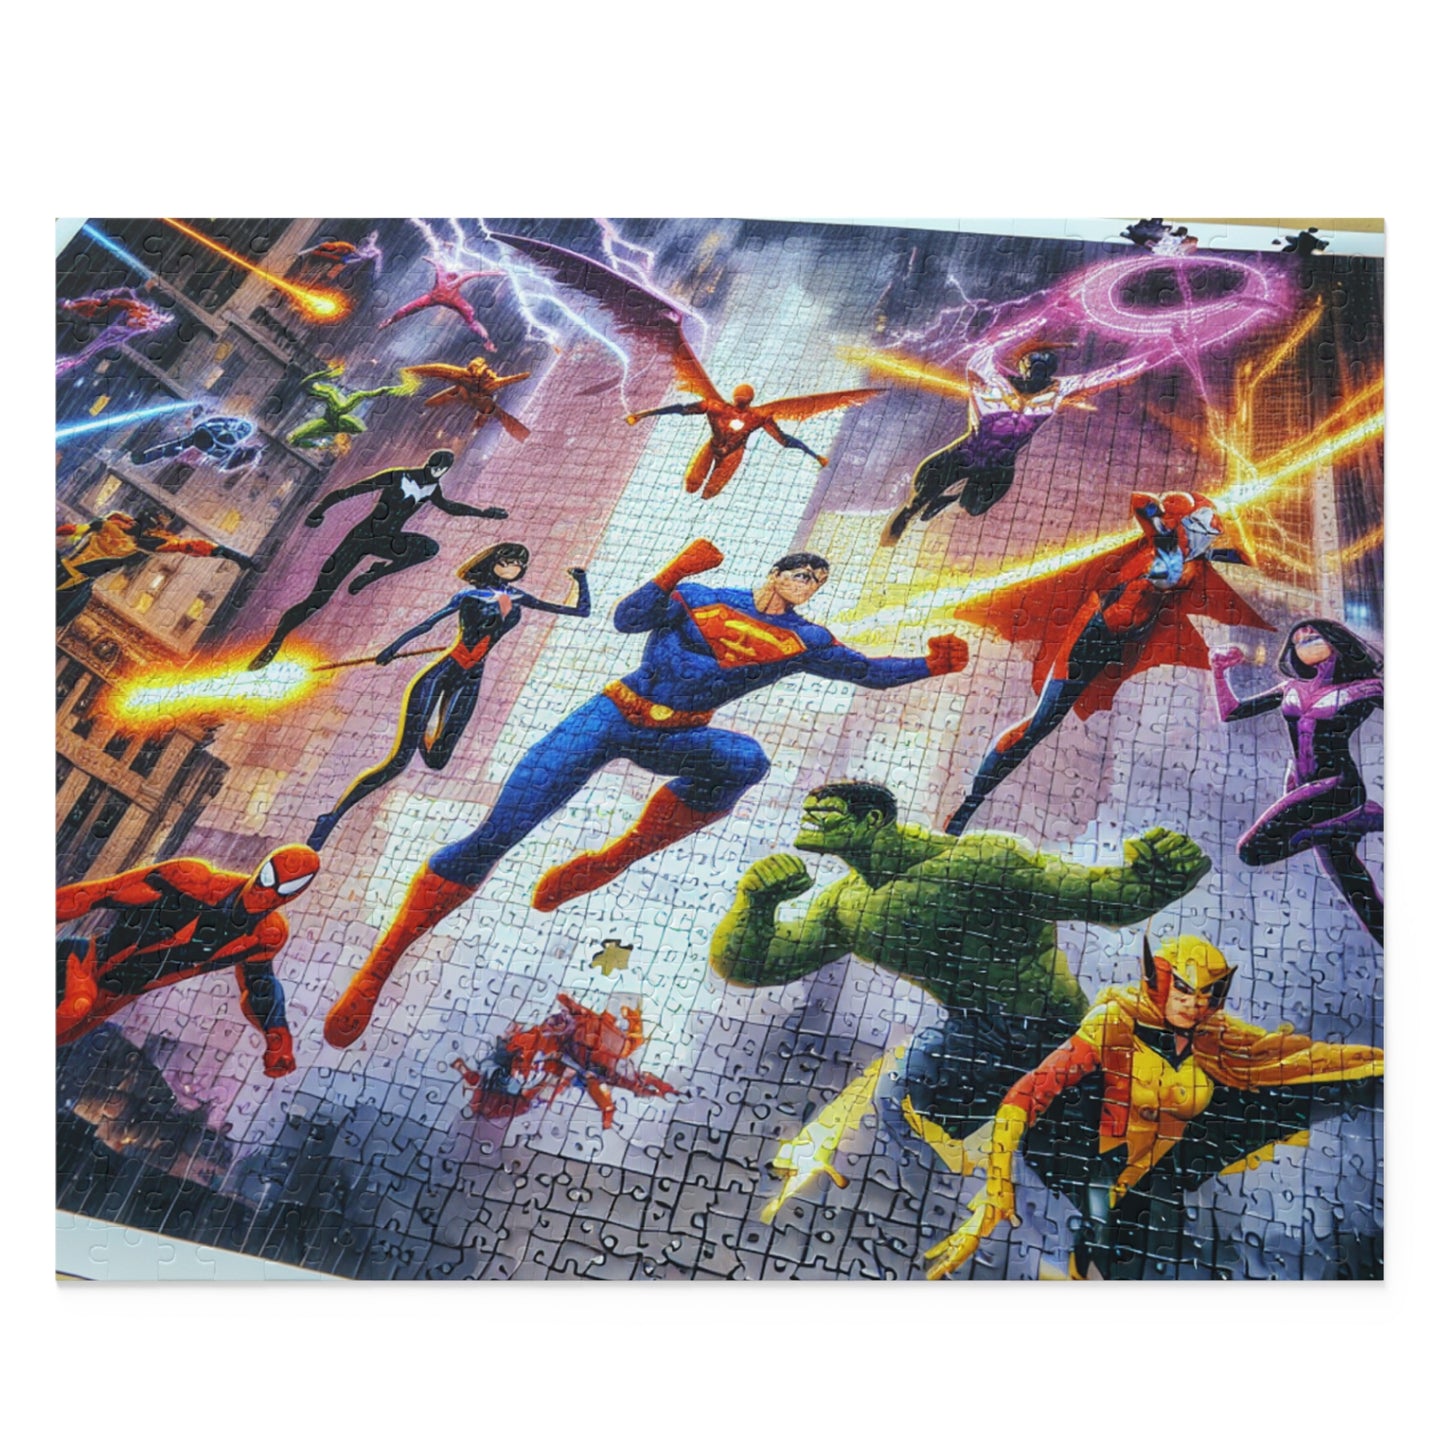 "Heroic Puzzles" - Jigsaw Puzzle Family Game